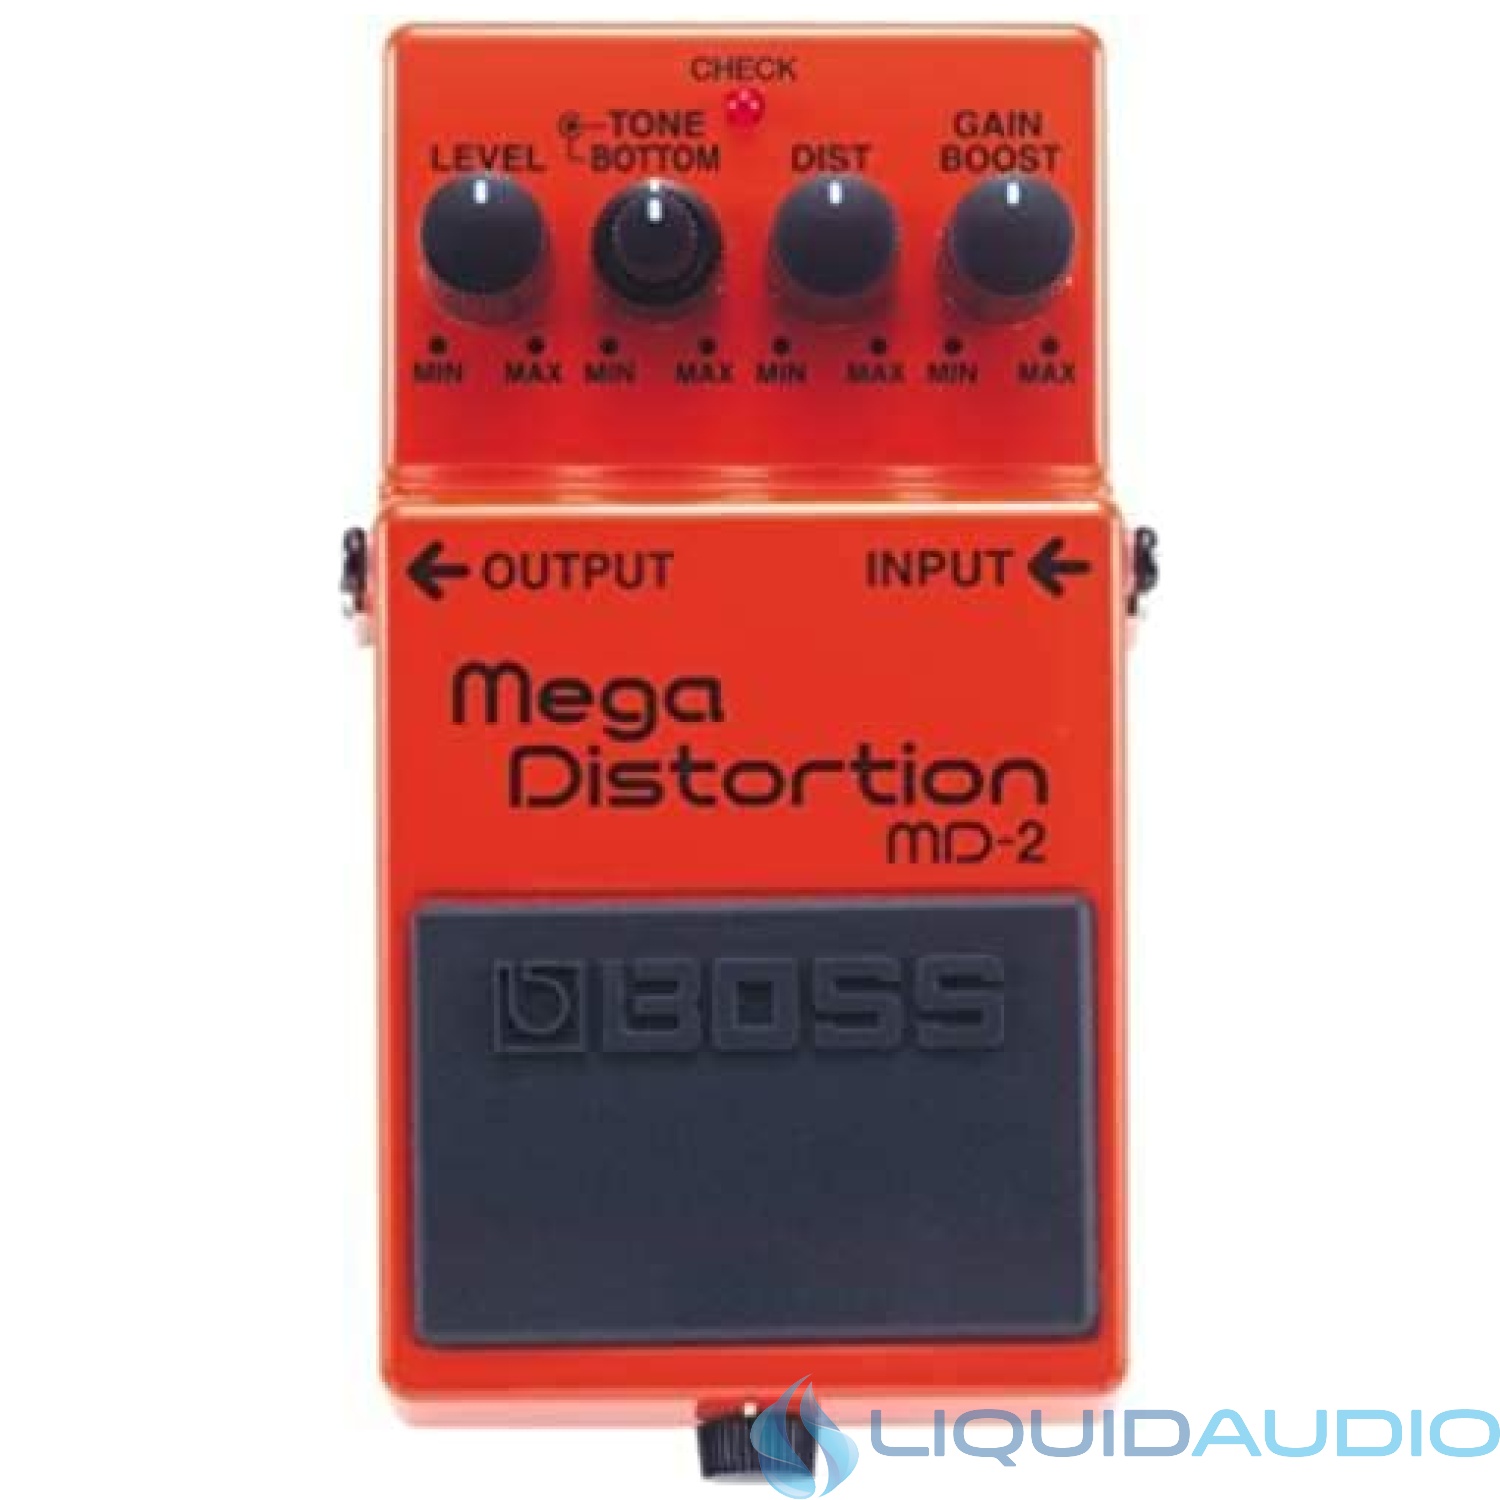 BOSS Md-2 Mega Distortion; Extreme, Low-End Distortion for Modern Metal And Hard Rock